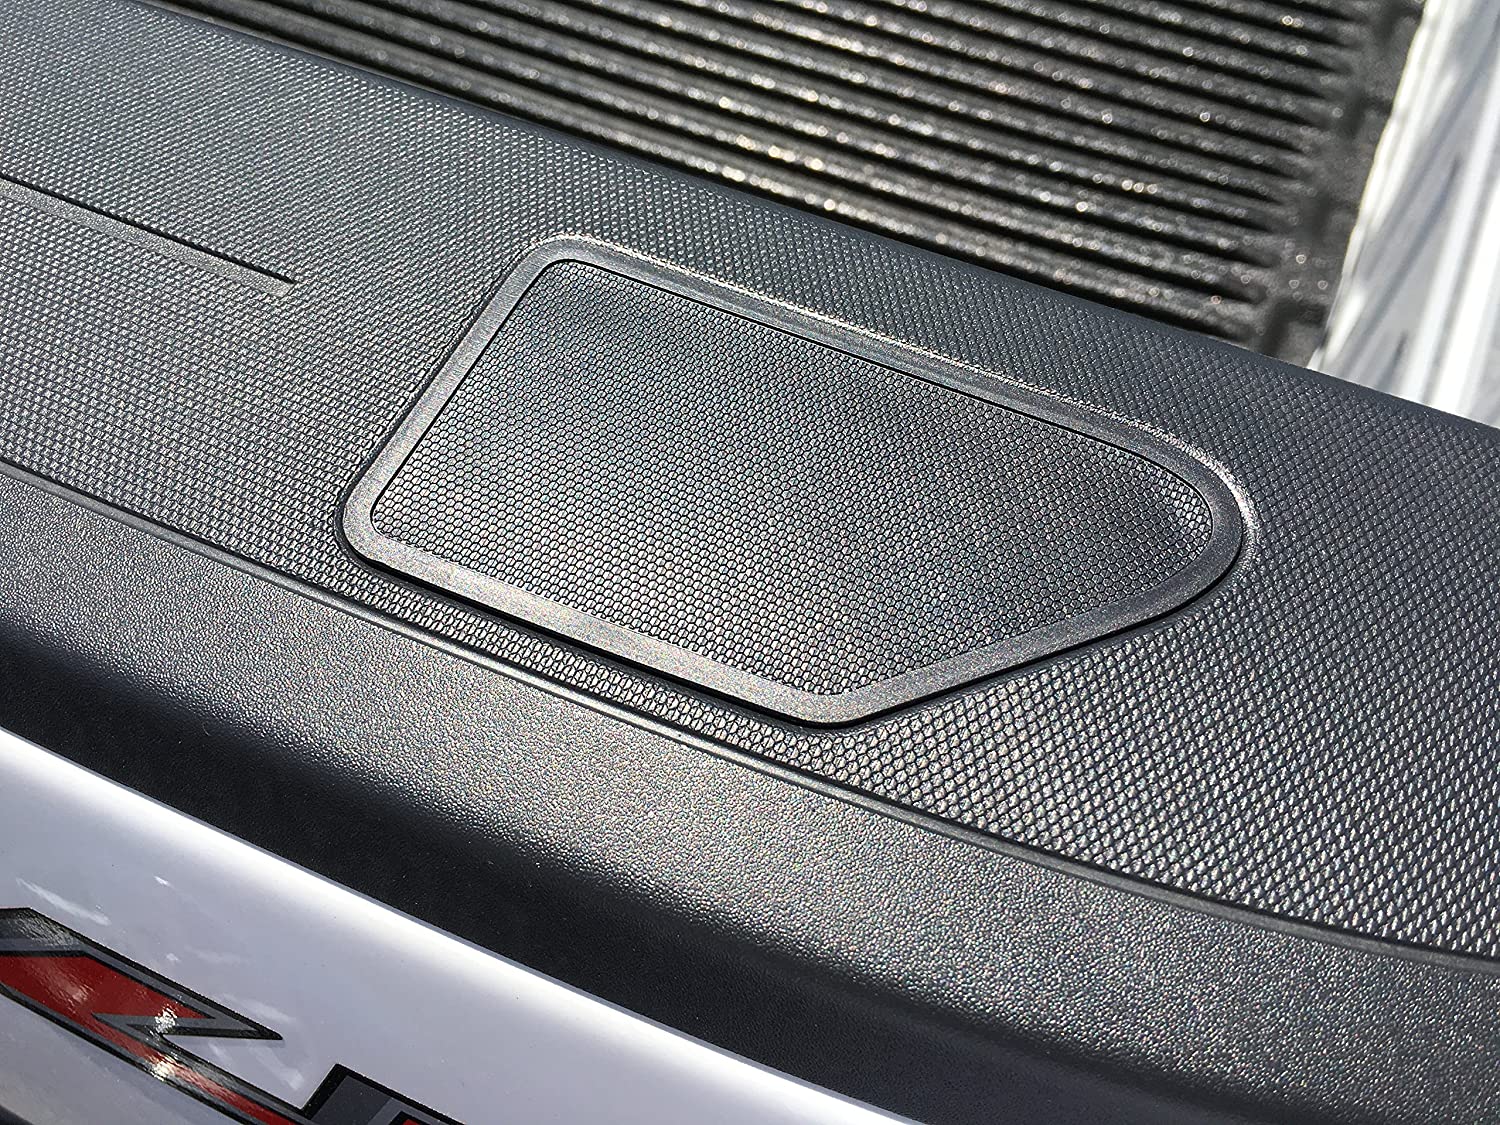 Close-up of installed Rail Caps Stake Pocket Cover on older GM pickup truck (fits most 2014-2018 models) from Engineered by Schildmeier